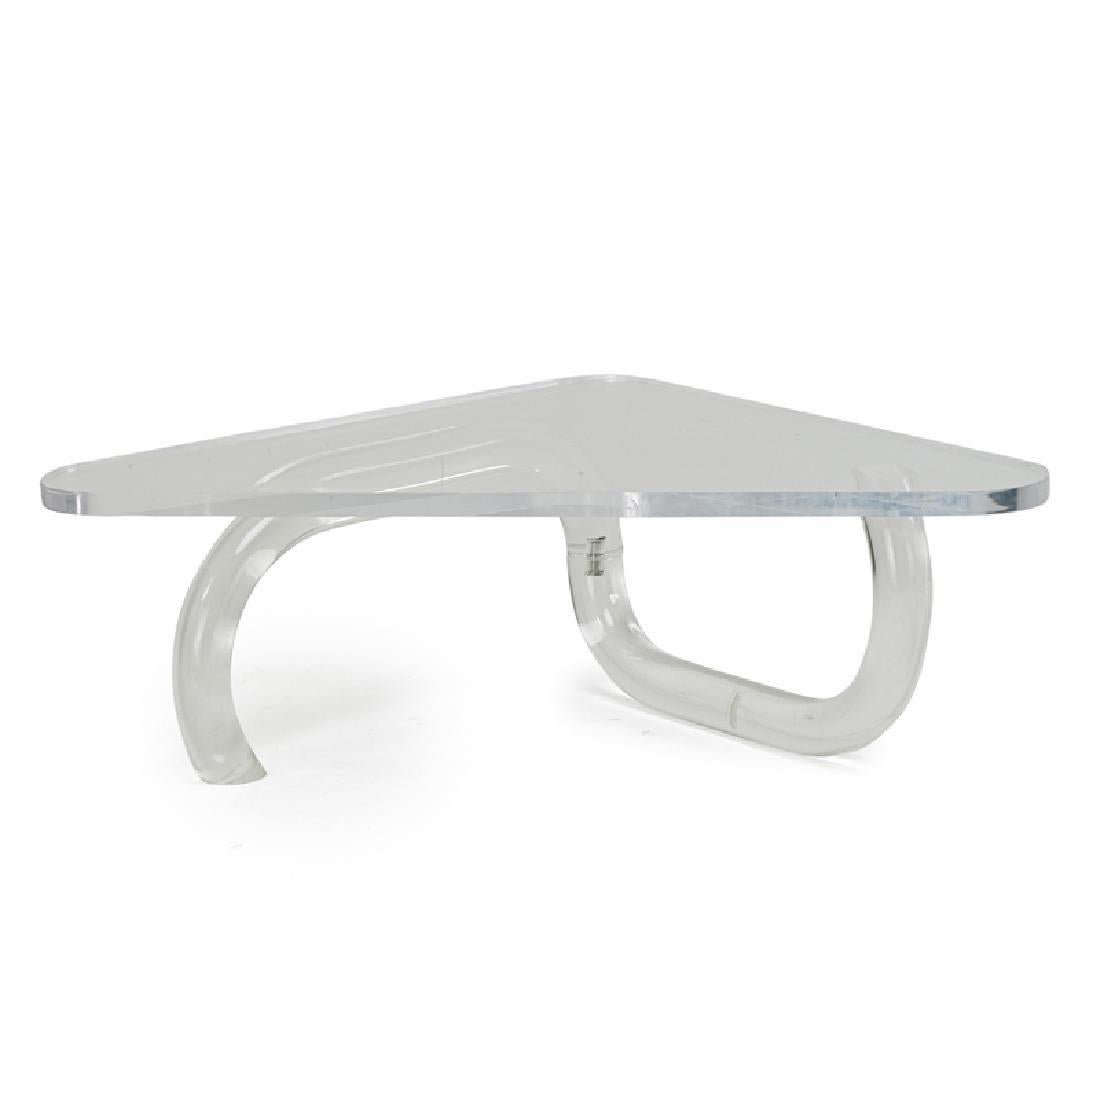 Stunning coffee table by the Lucite icon, Charles Hollis Jones originally designed in the mid-1970s.
The table has wonderful lines and a very minimalistic look, top can be made to order to better match your space needs.

Measurements:
50.5